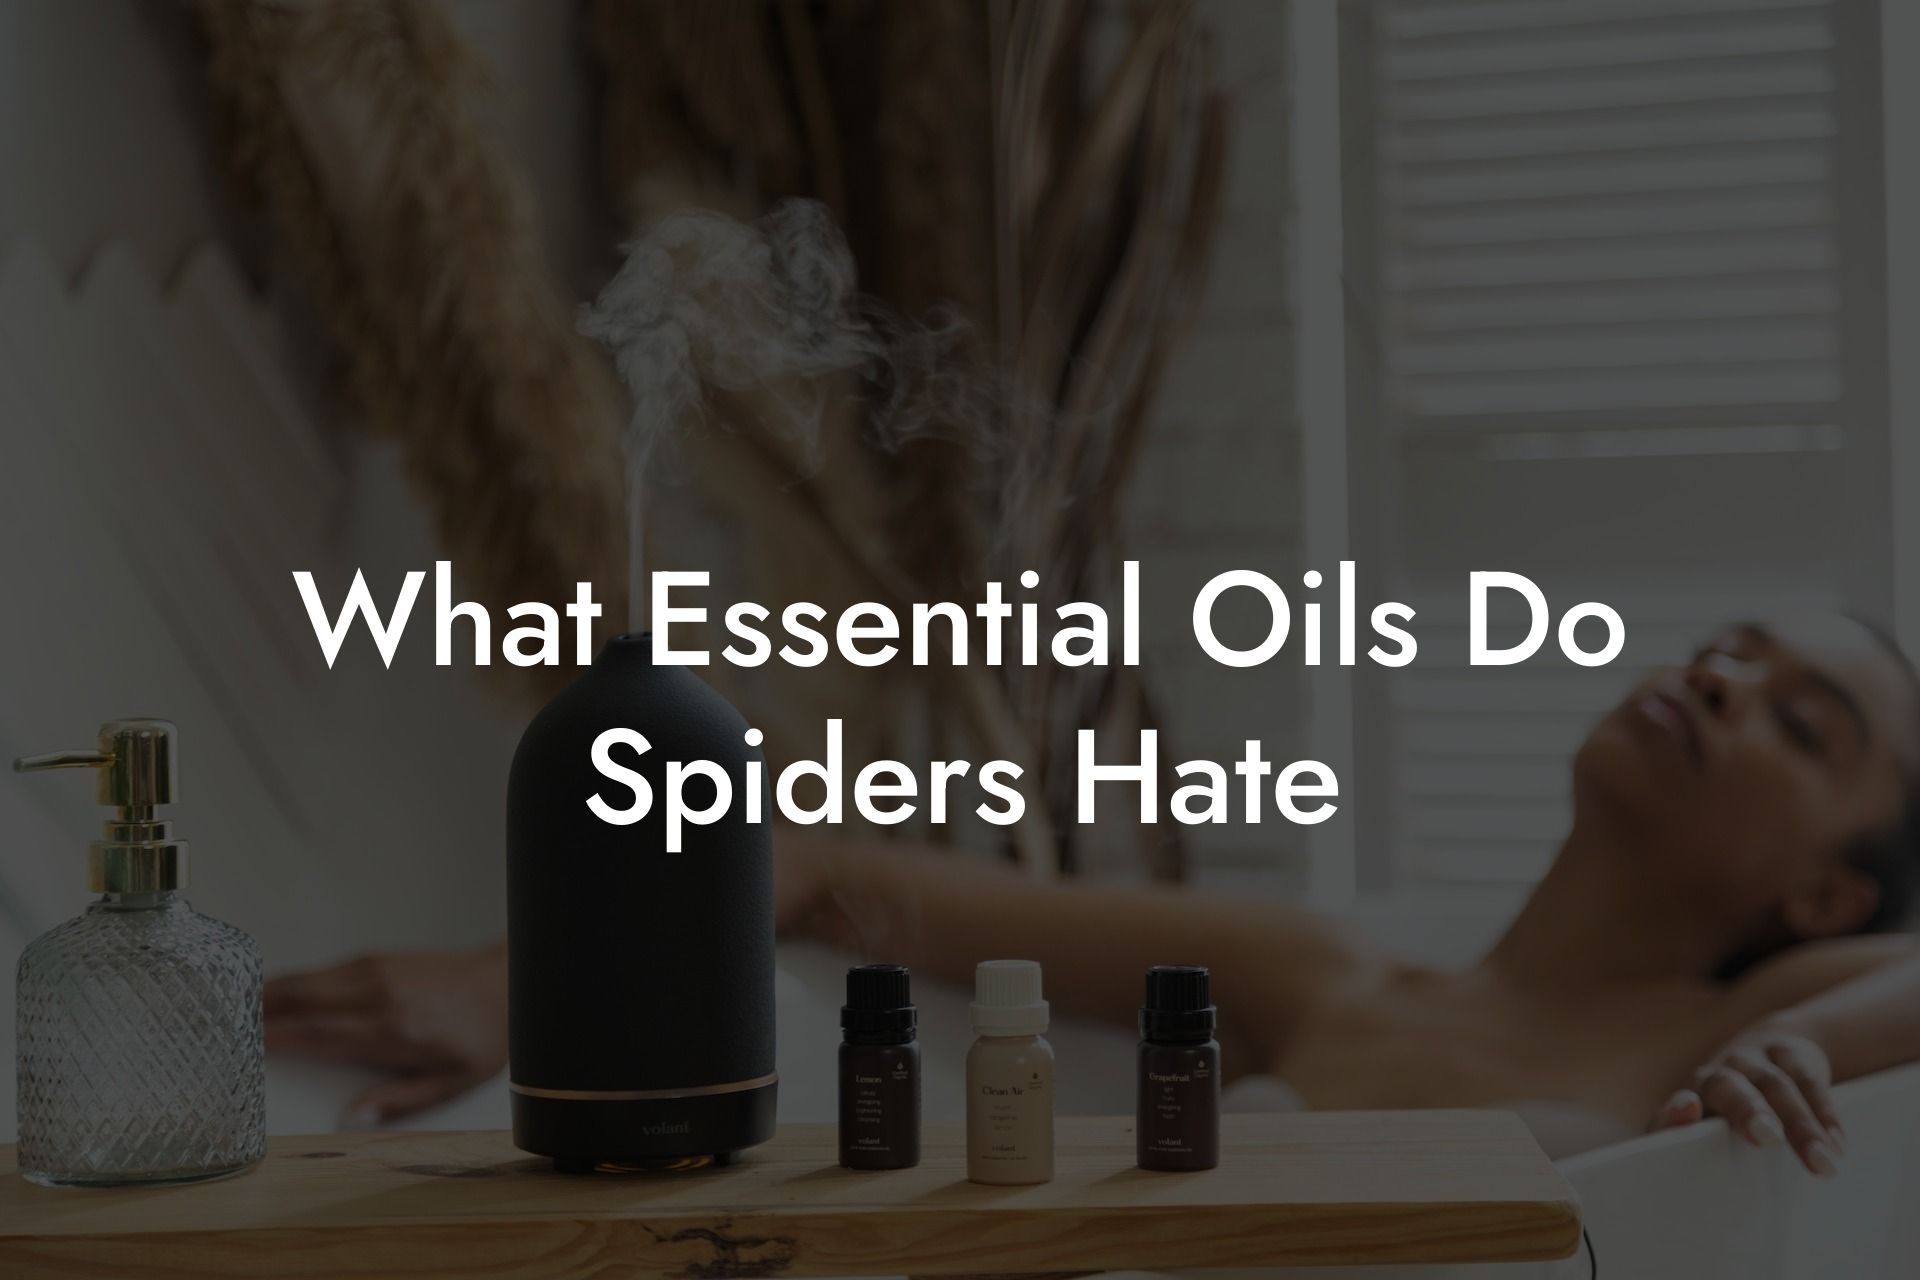 What Essential Oils Do Spiders Hate